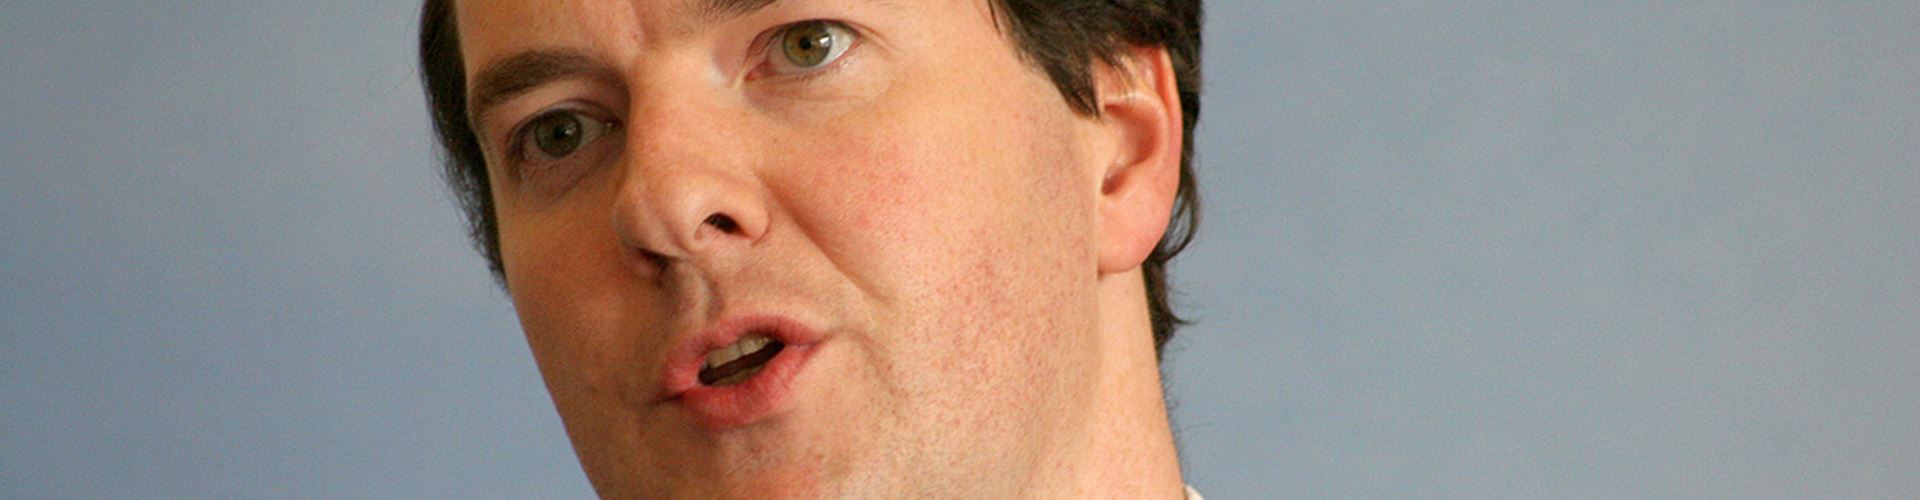 New national living wage tops Osborne's Budget announcement